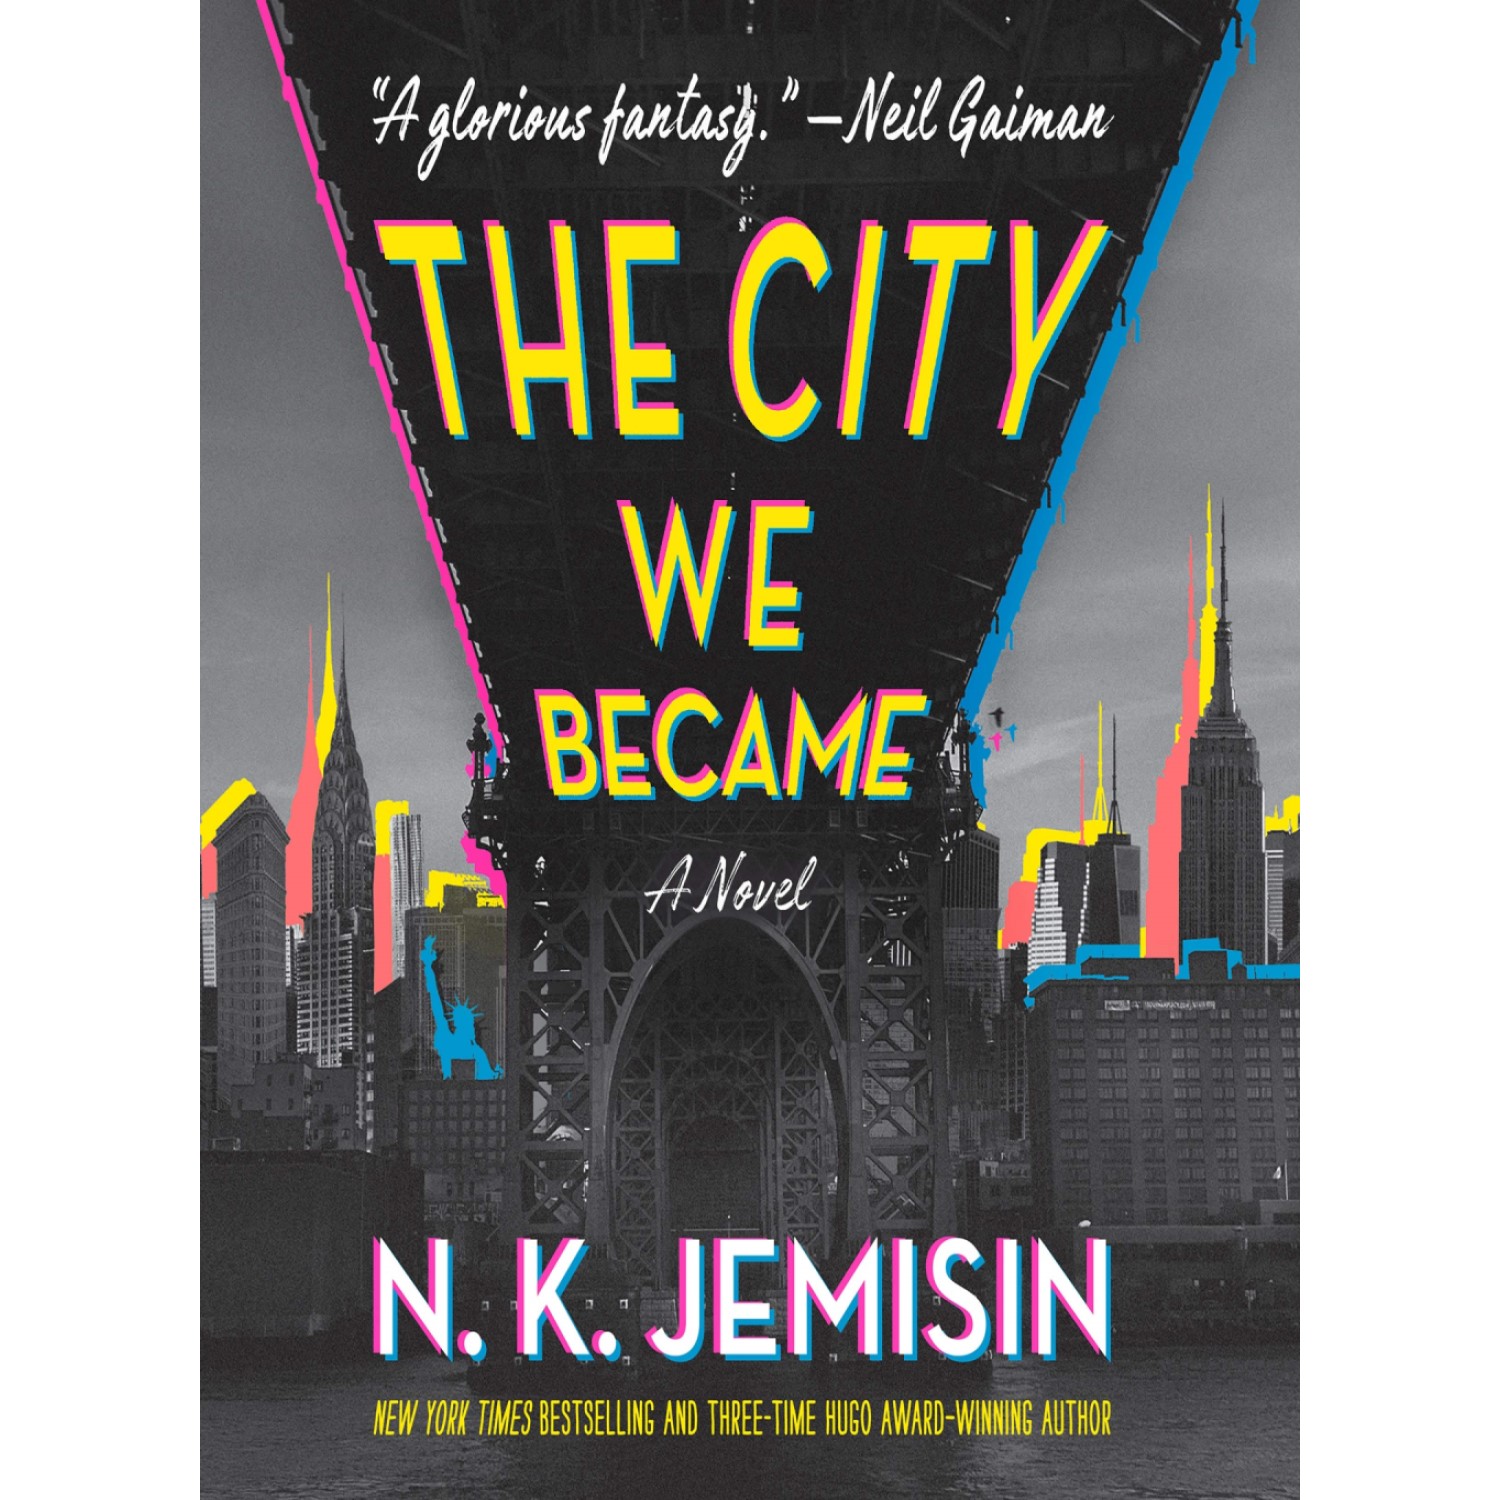 the city that we became